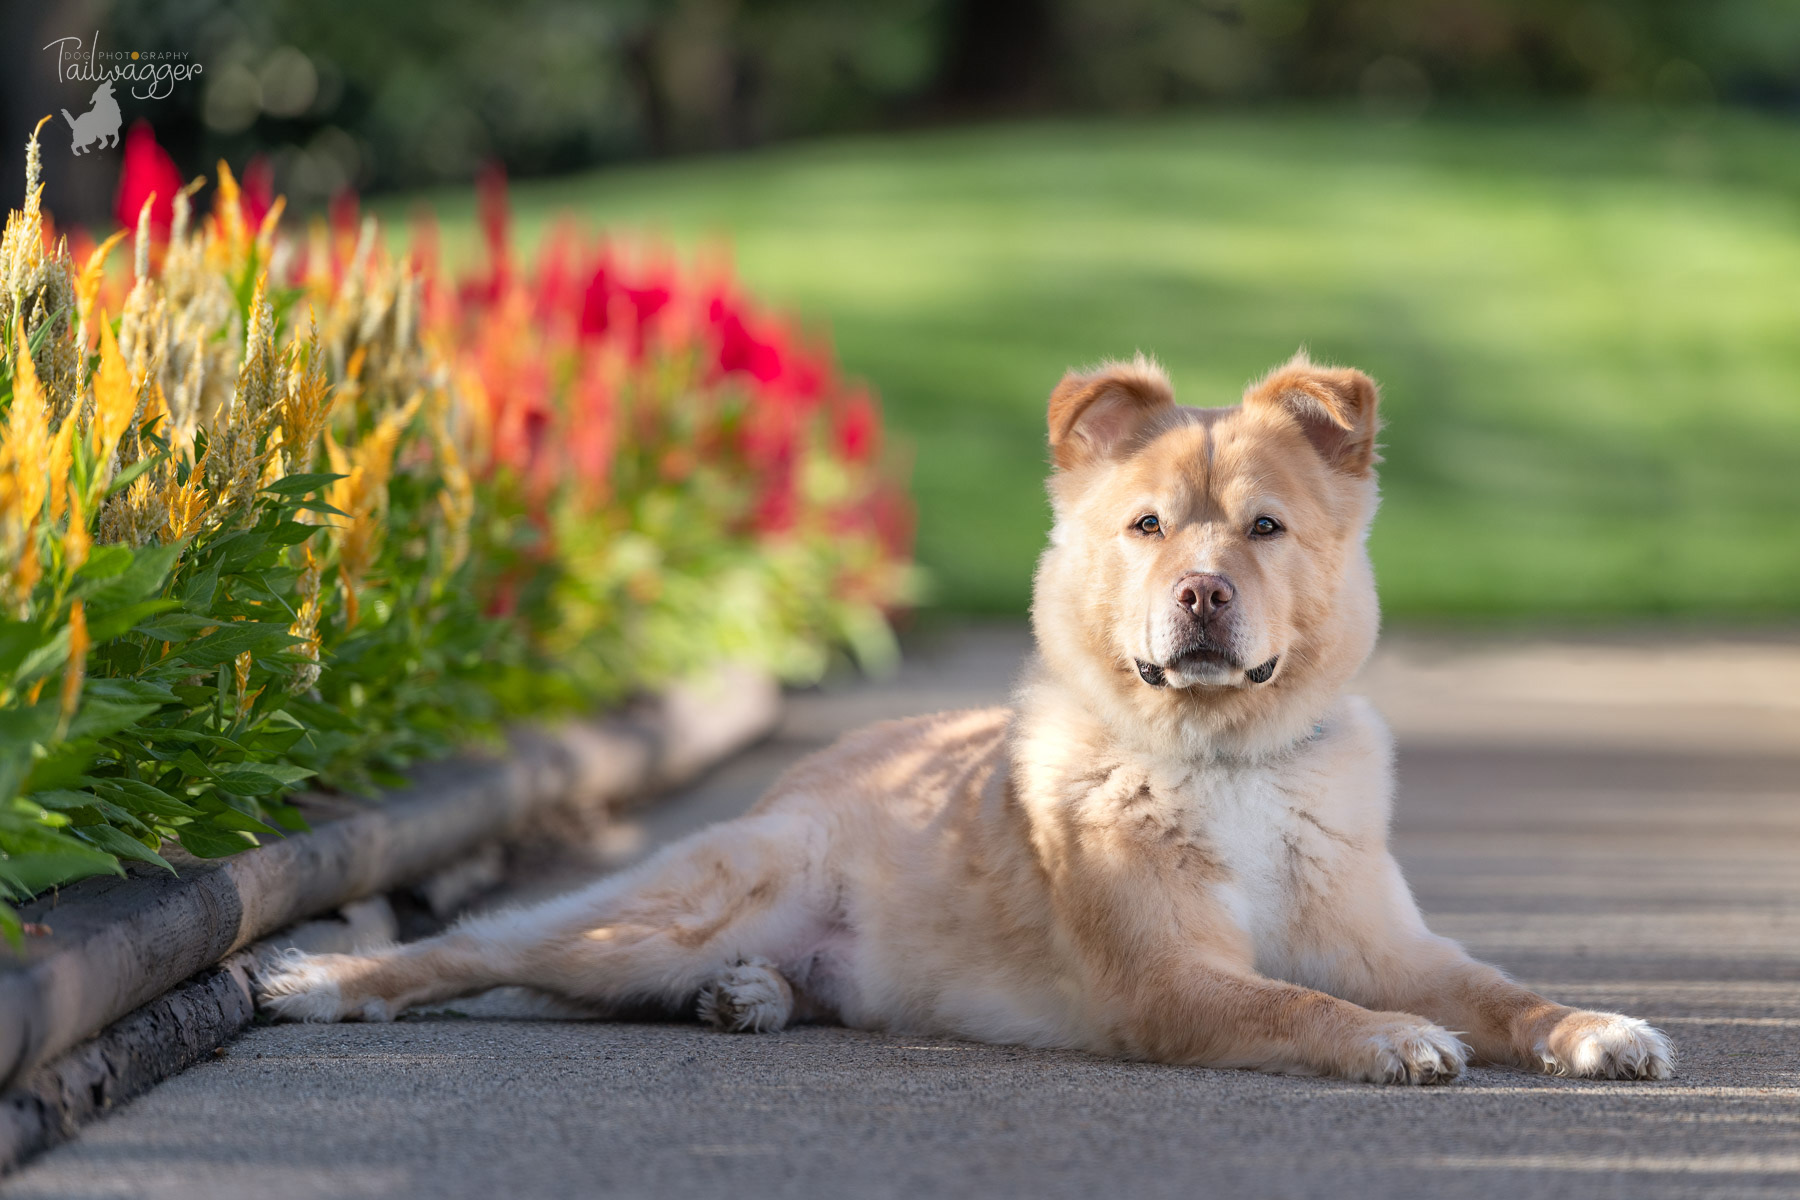 A dog portrait by Grand Rapids dog photographer, Tailwagger, of a male Golden Retriever mix lying by flowers.